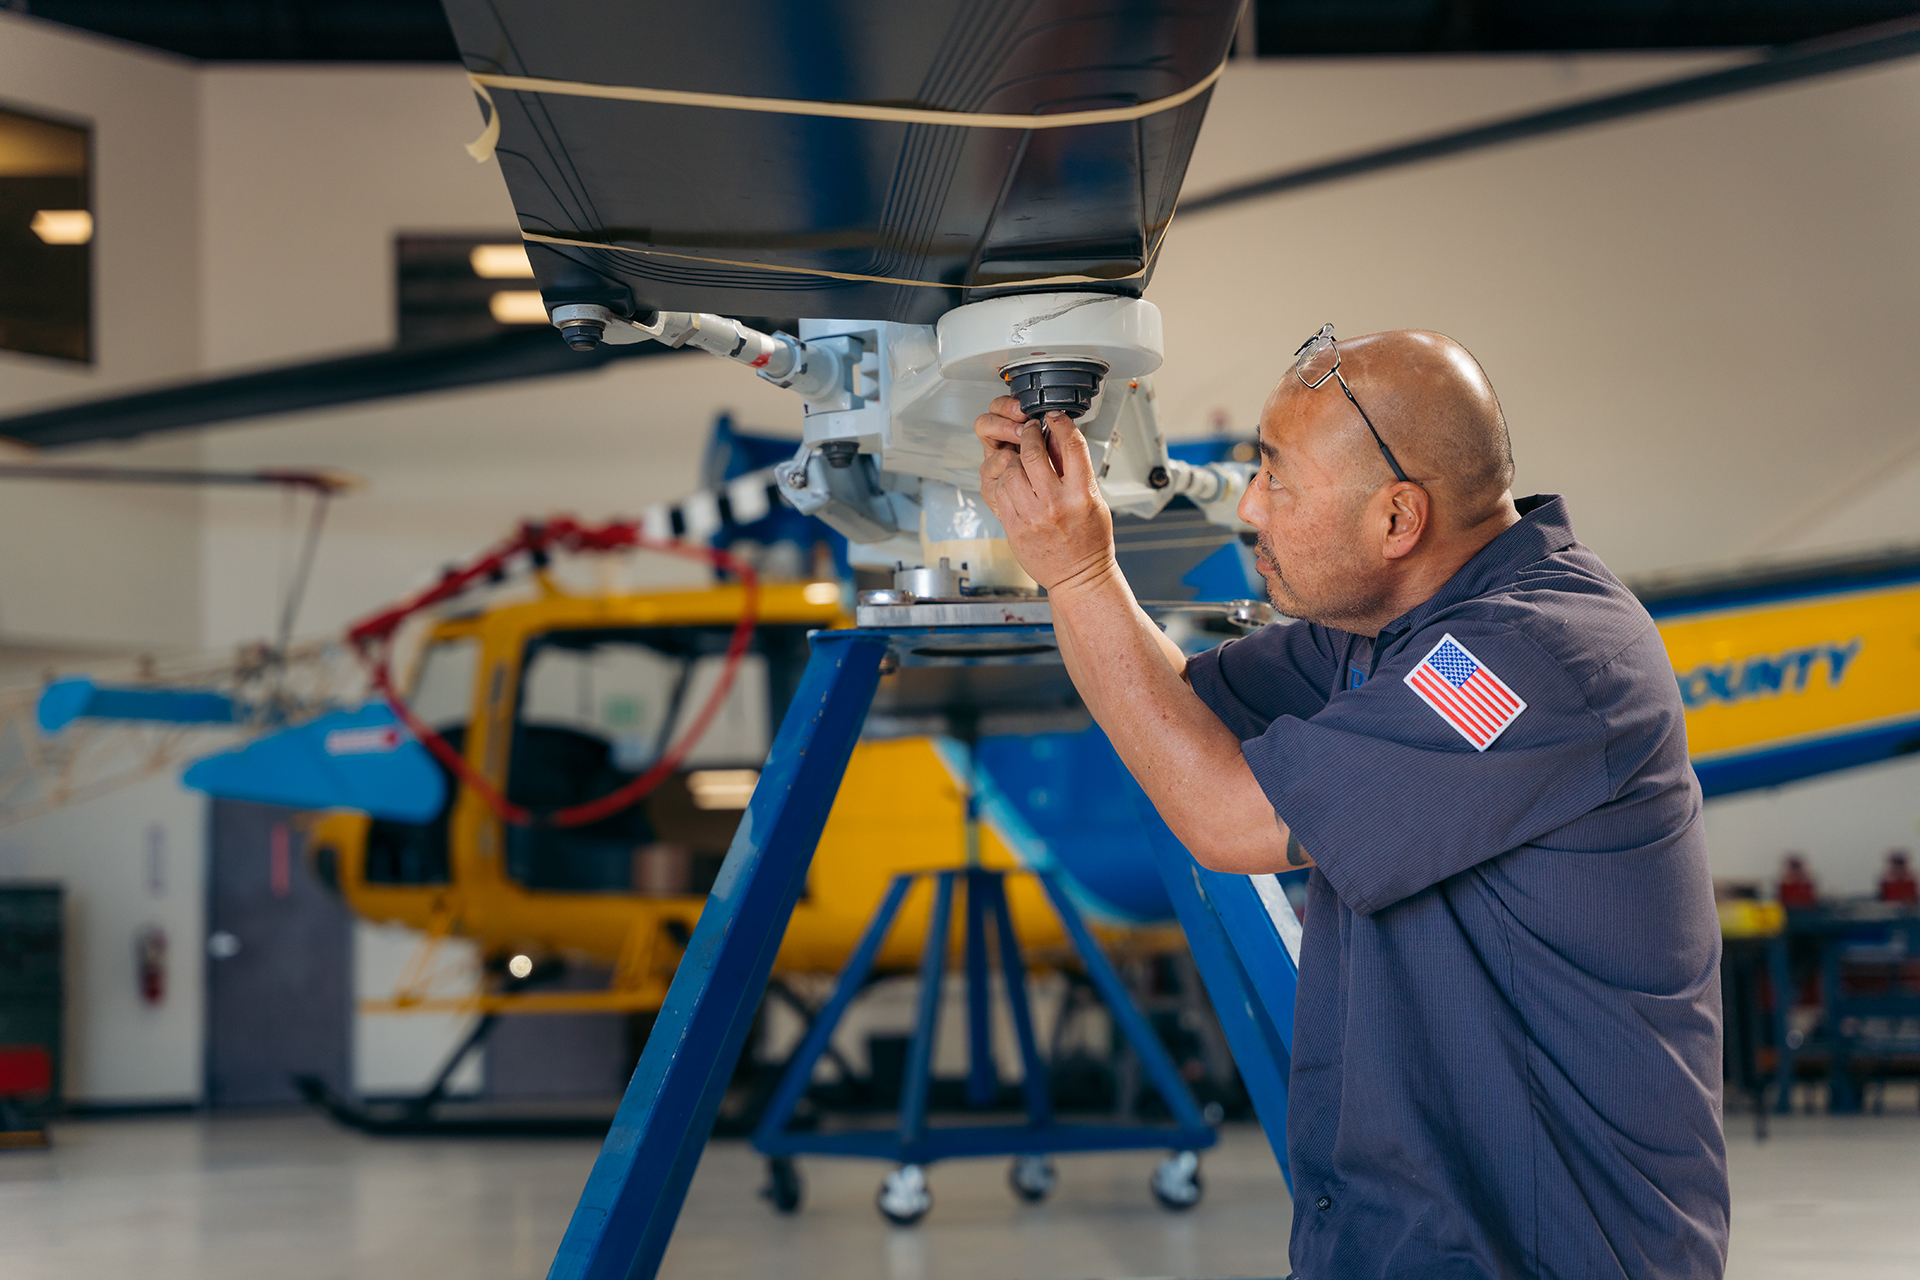 A man working on a helicopter in a hangar.